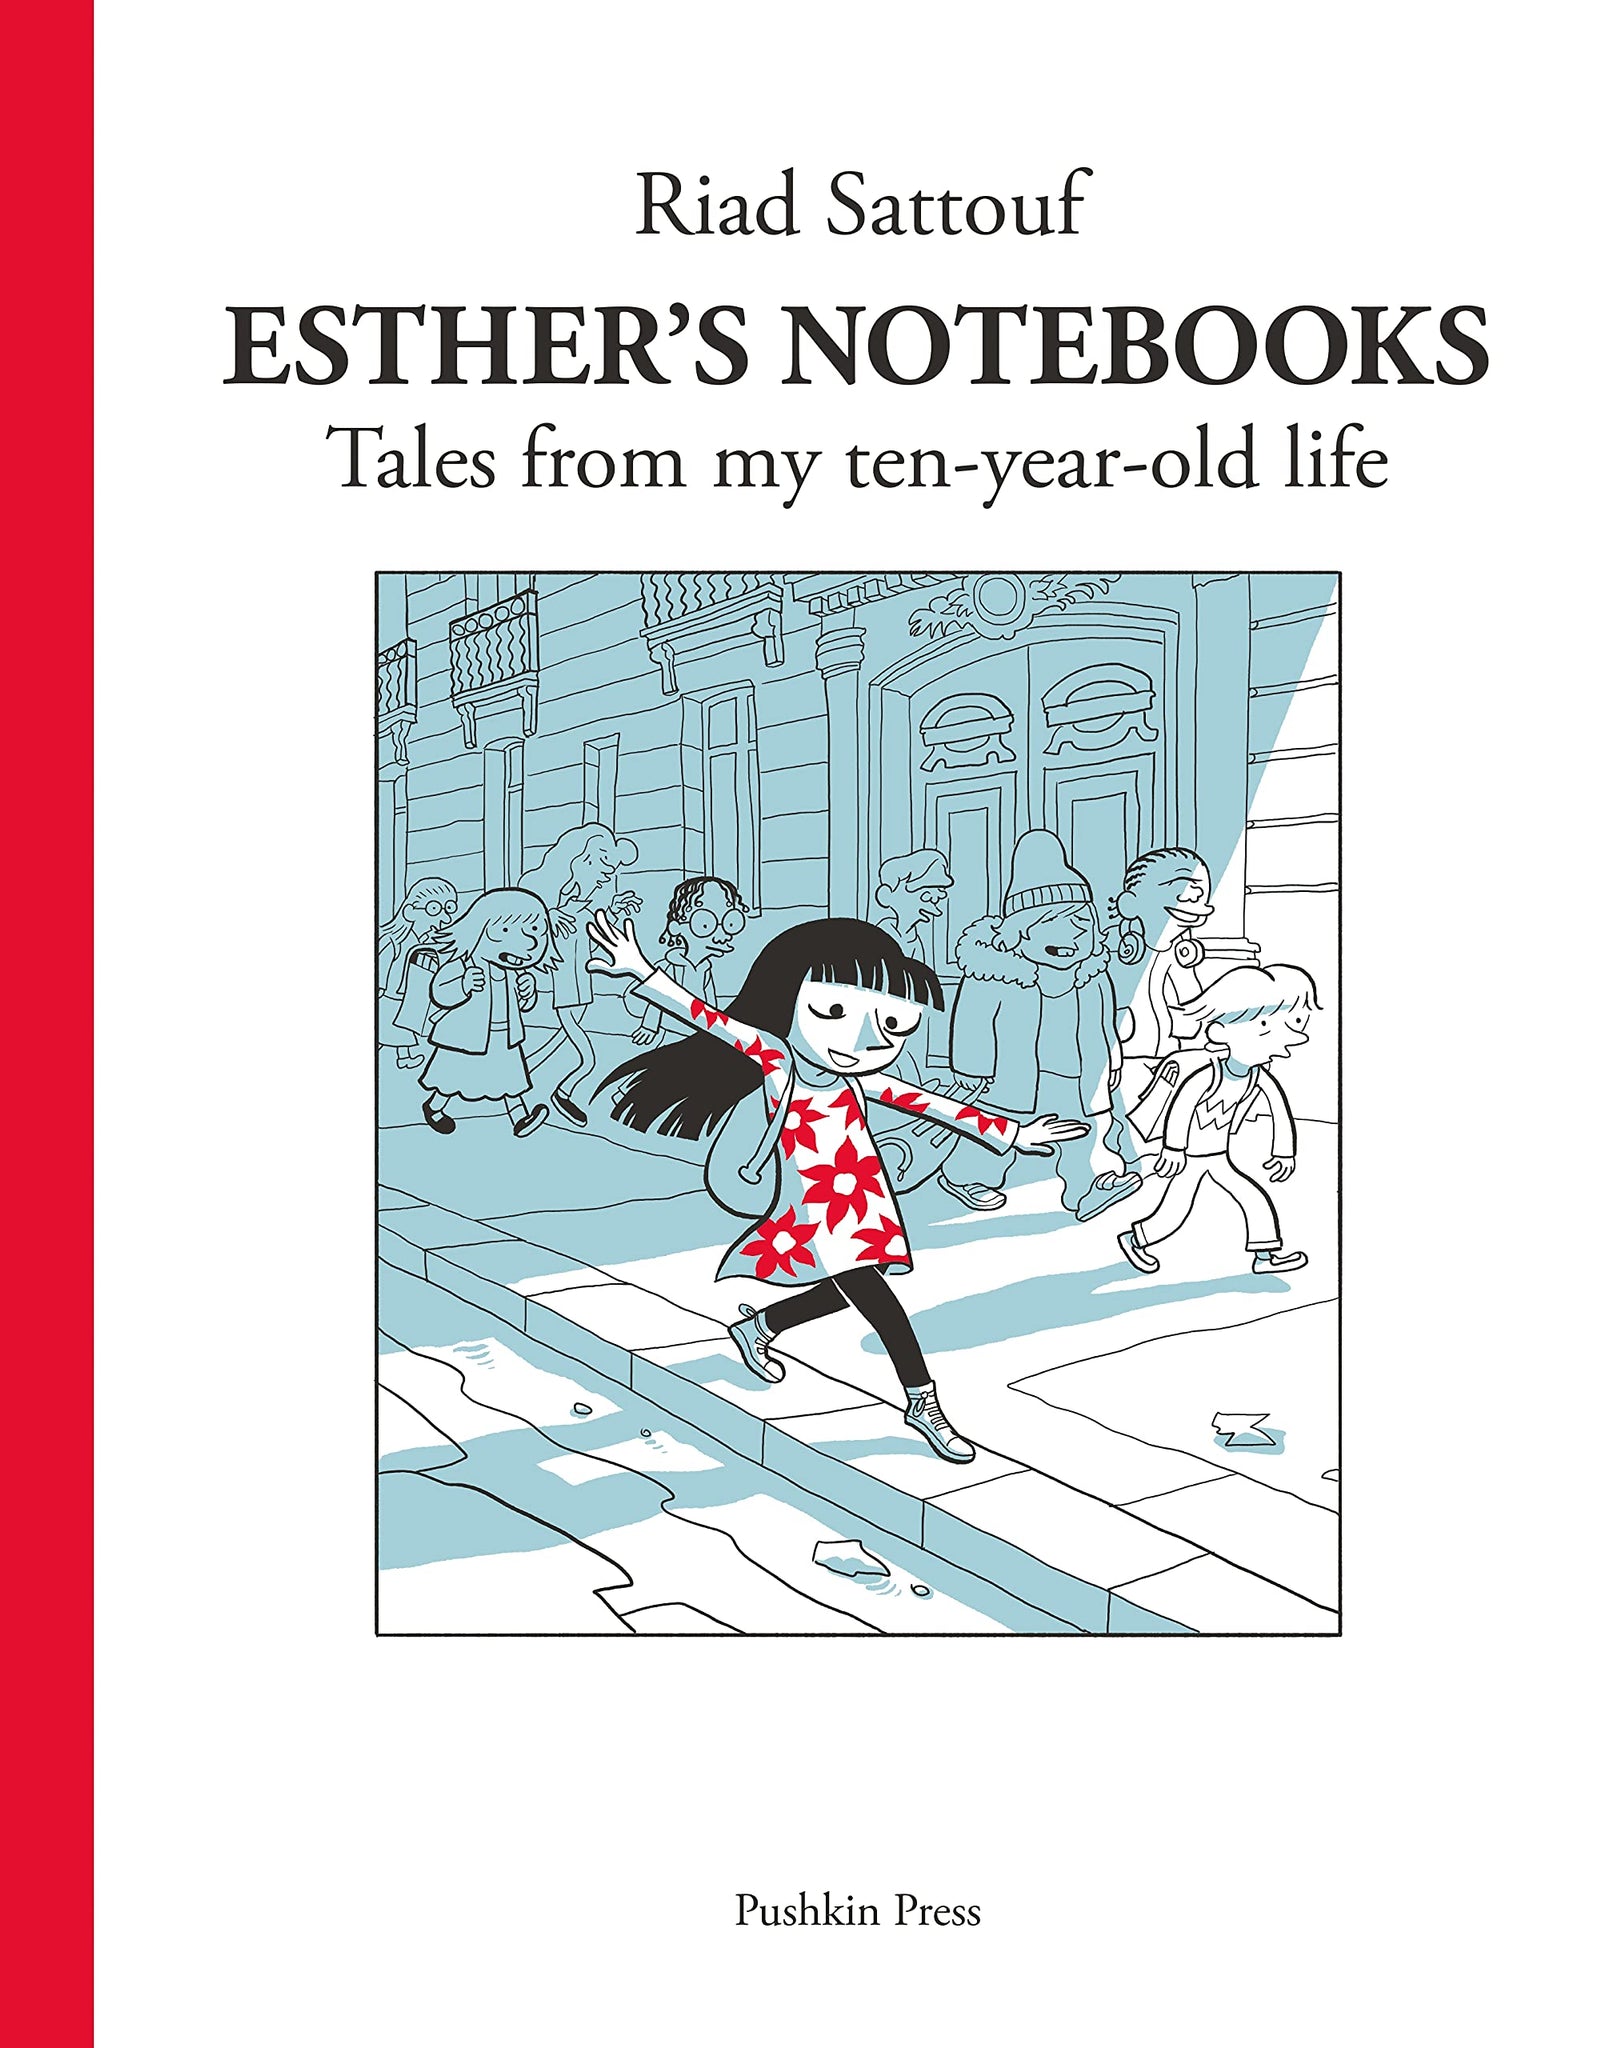 Esther's Notebooks: Tales From My Ten-Year-Old Life